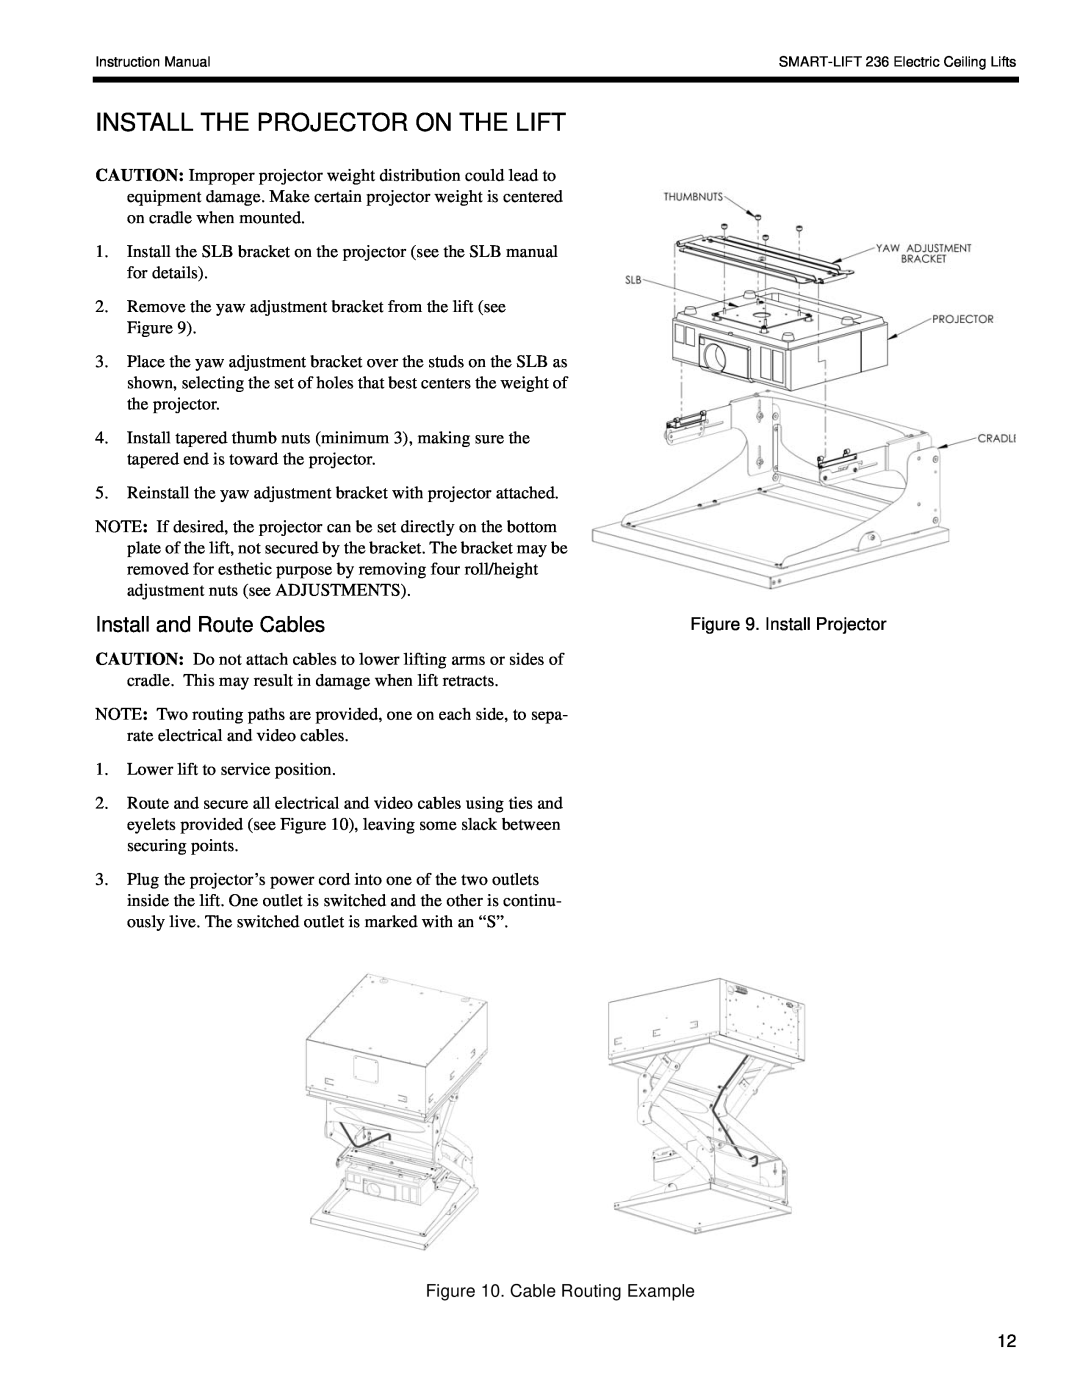 Chief Manufacturing SL-236 installation instructions Install The Projector On The Lift, Install and Route Cables 